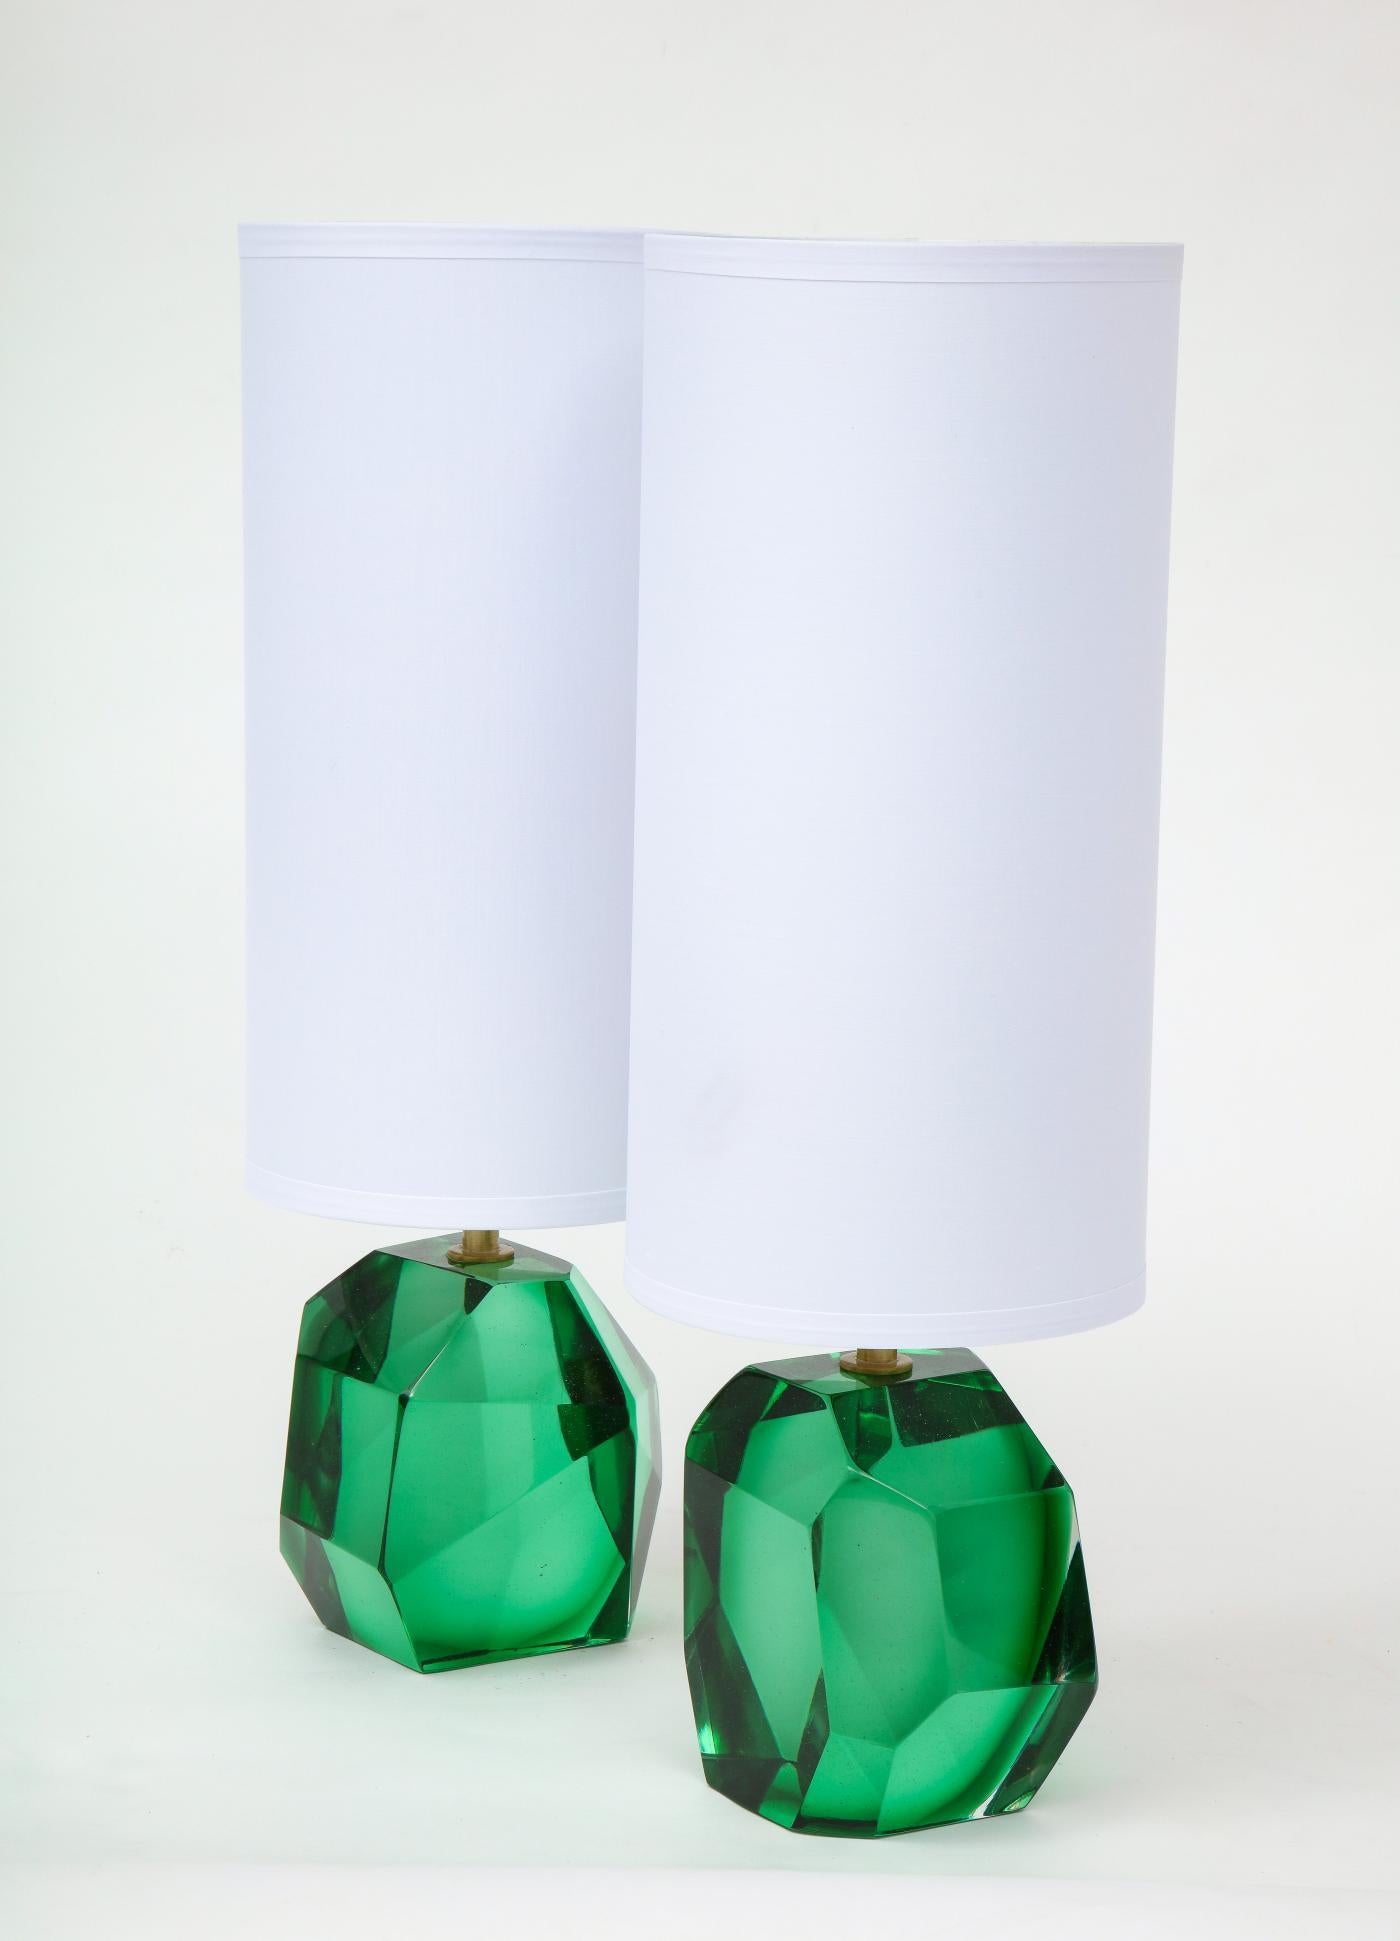 Unique pair of solid faceted Murano glass table lamps in a vibrant and bold Emerald green color with a gold tone or brass armature, heavy and solid. Made by hand in Murano, Italy, by the Murano Glass Master, Alberto Dona. Wired for U.S. use.